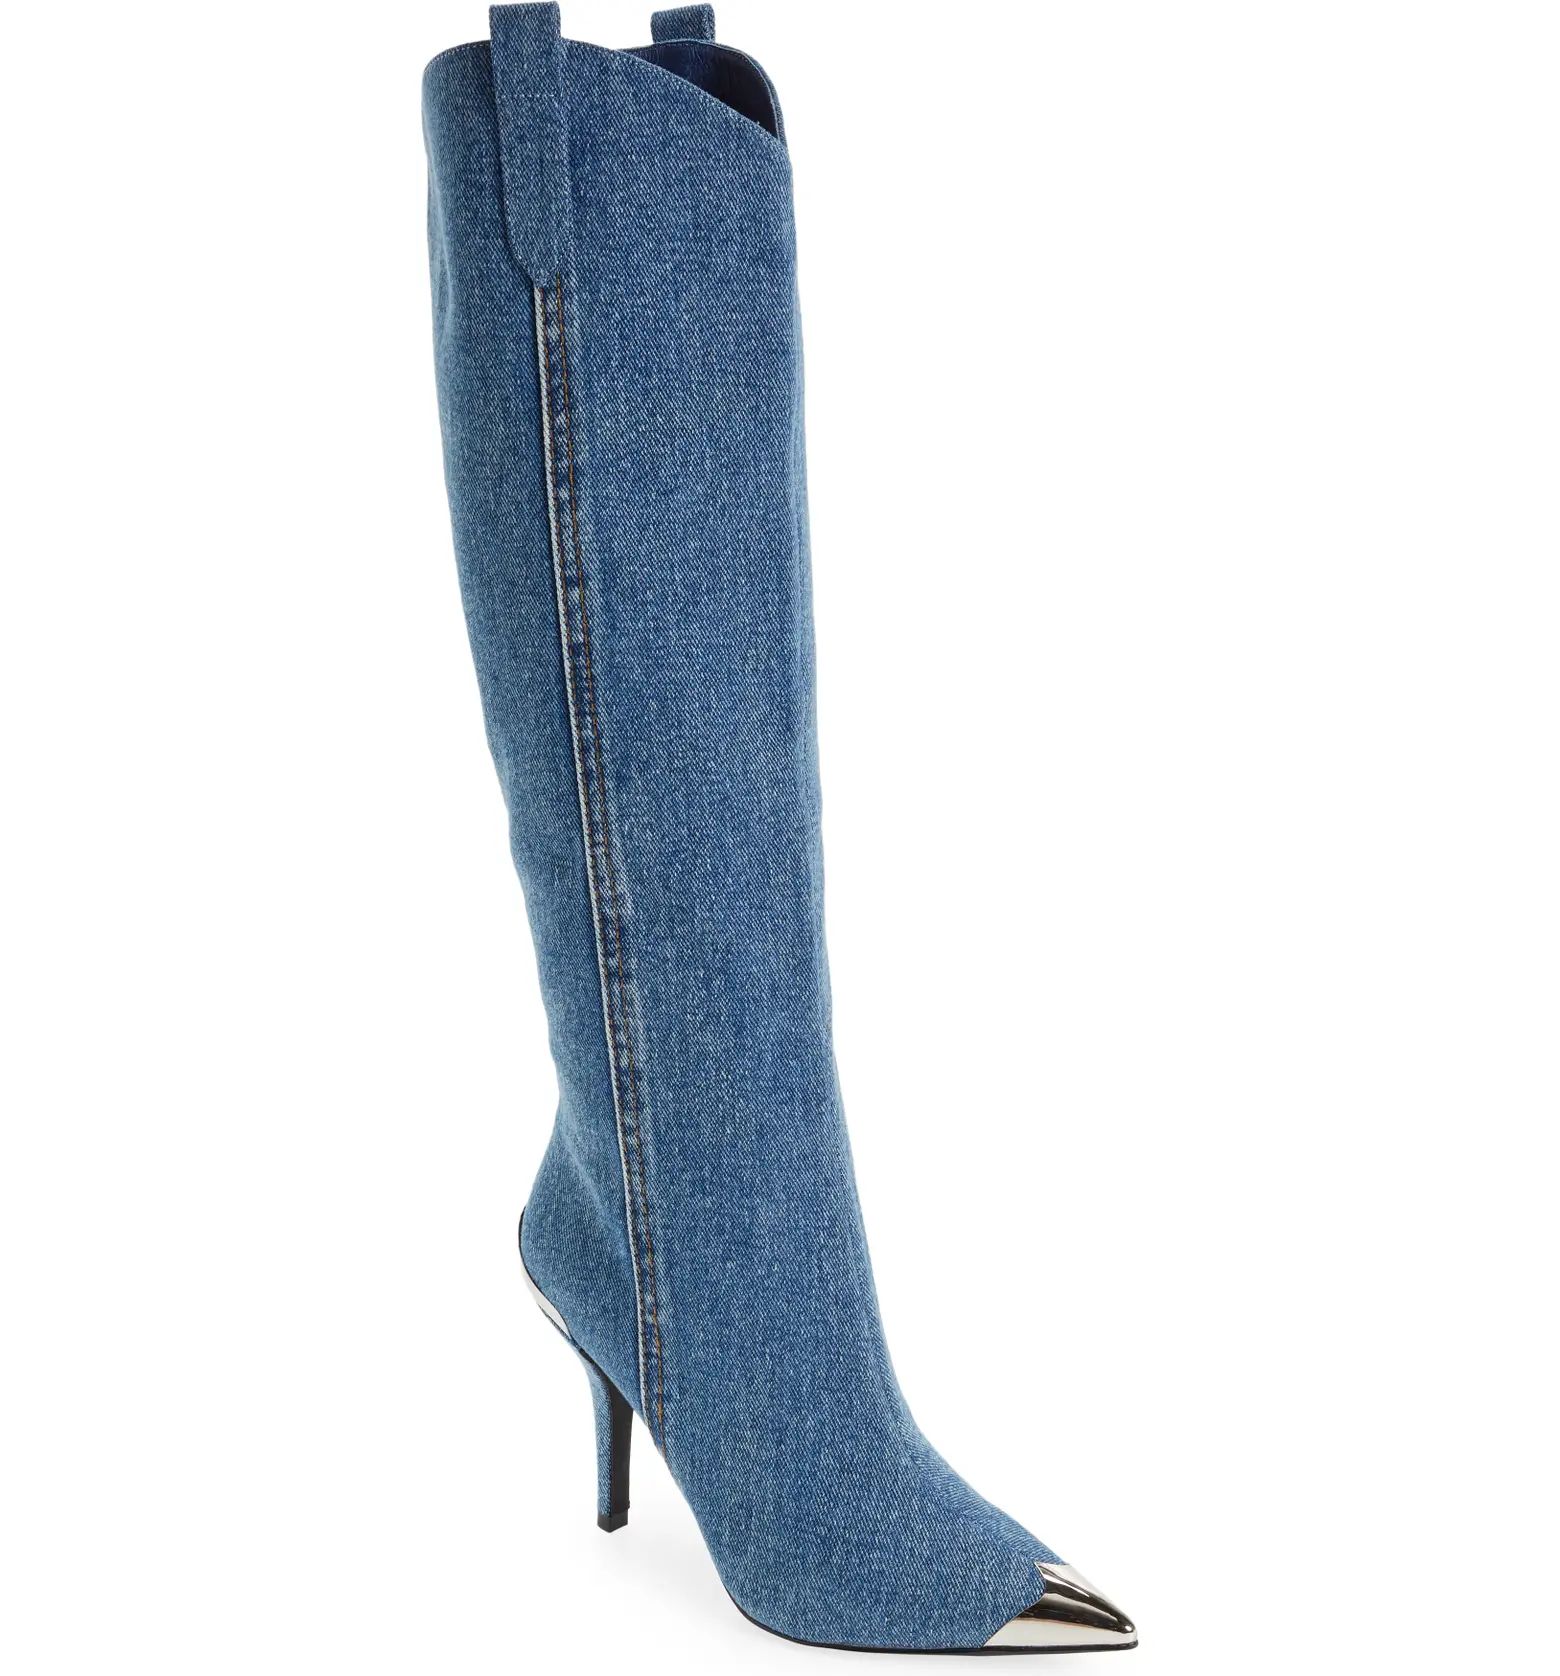 By Golly Knee High Denim Western Boot | Nordstrom